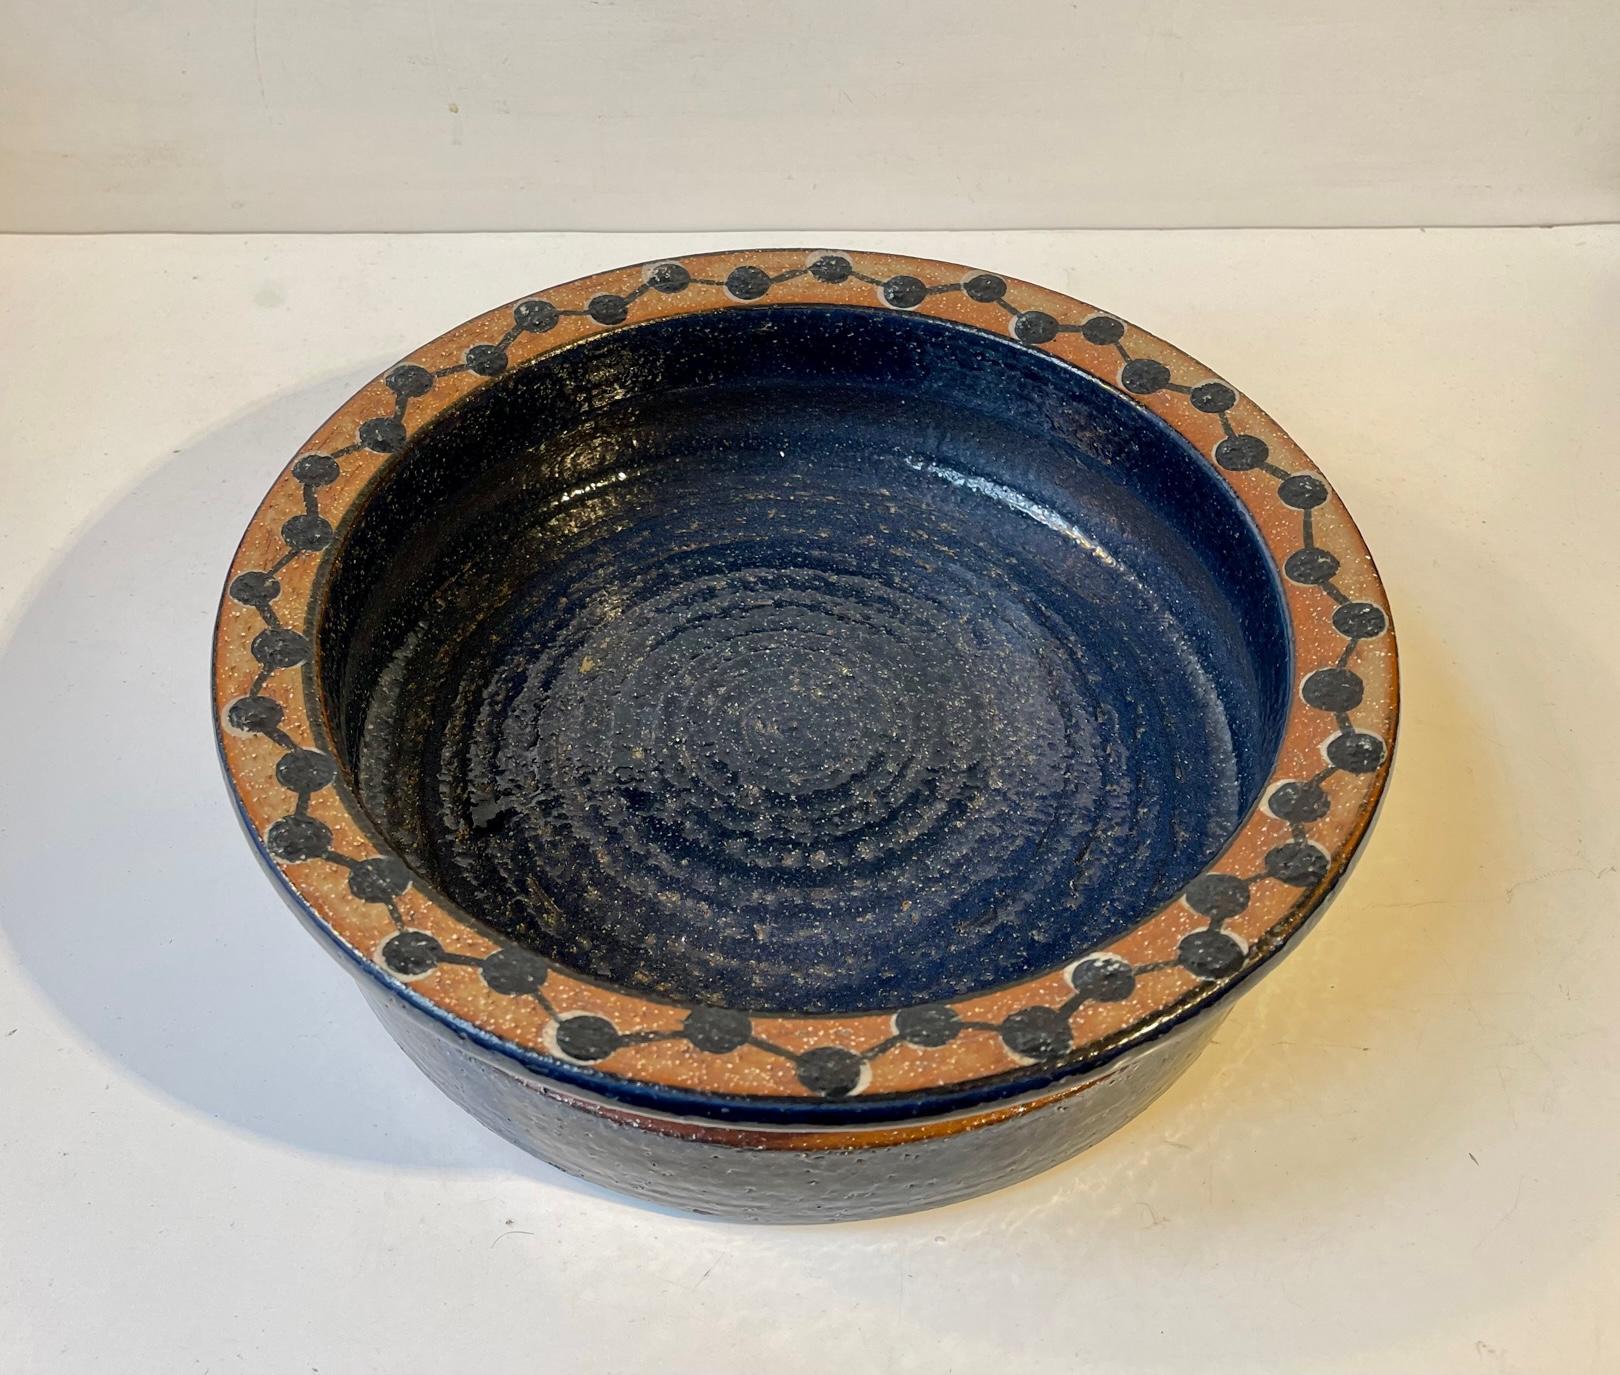 Large stoneware bowl. Decorated with blue glaze and stylized molecules around its perimeter. Made by Søholm in Denmark during the 1970s. Design number: 372144 - handmade. Measurements: D: 30, H: 8.5 cm.